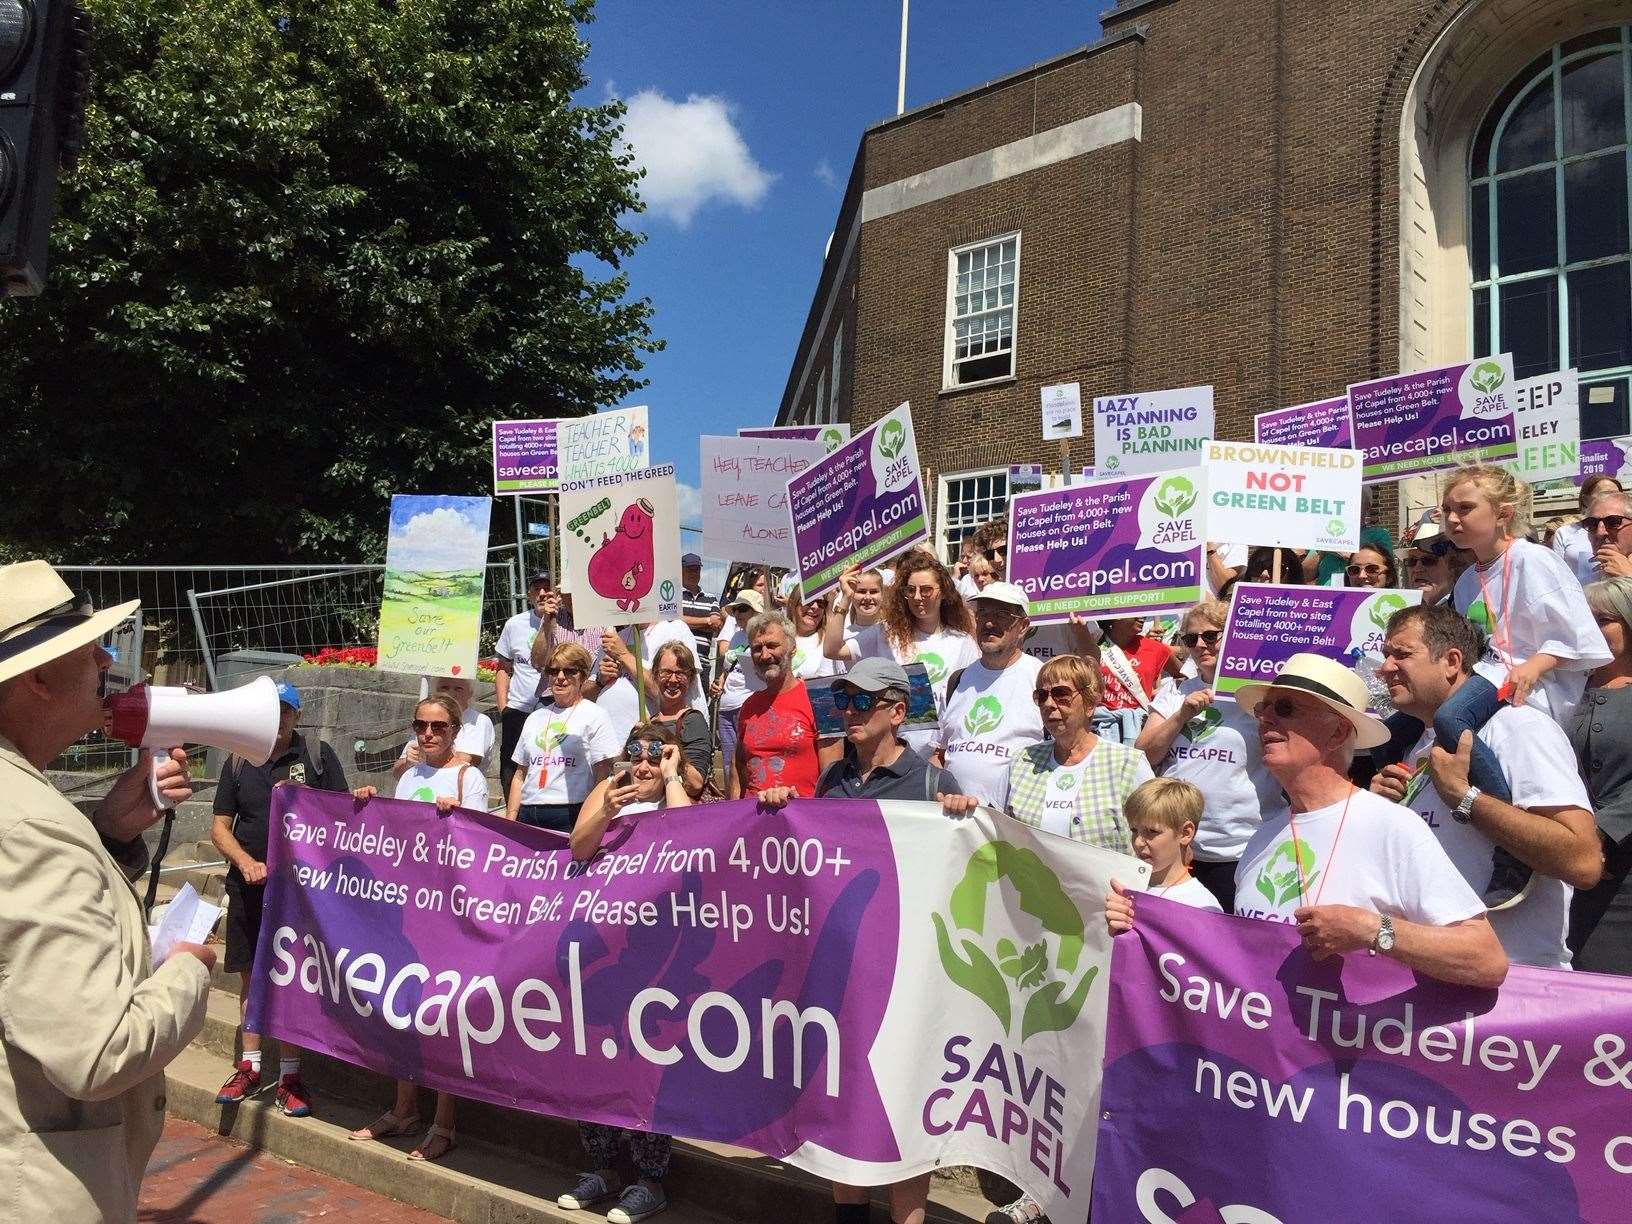 Save Capel has led a highly visible and active campaign against development in the parish